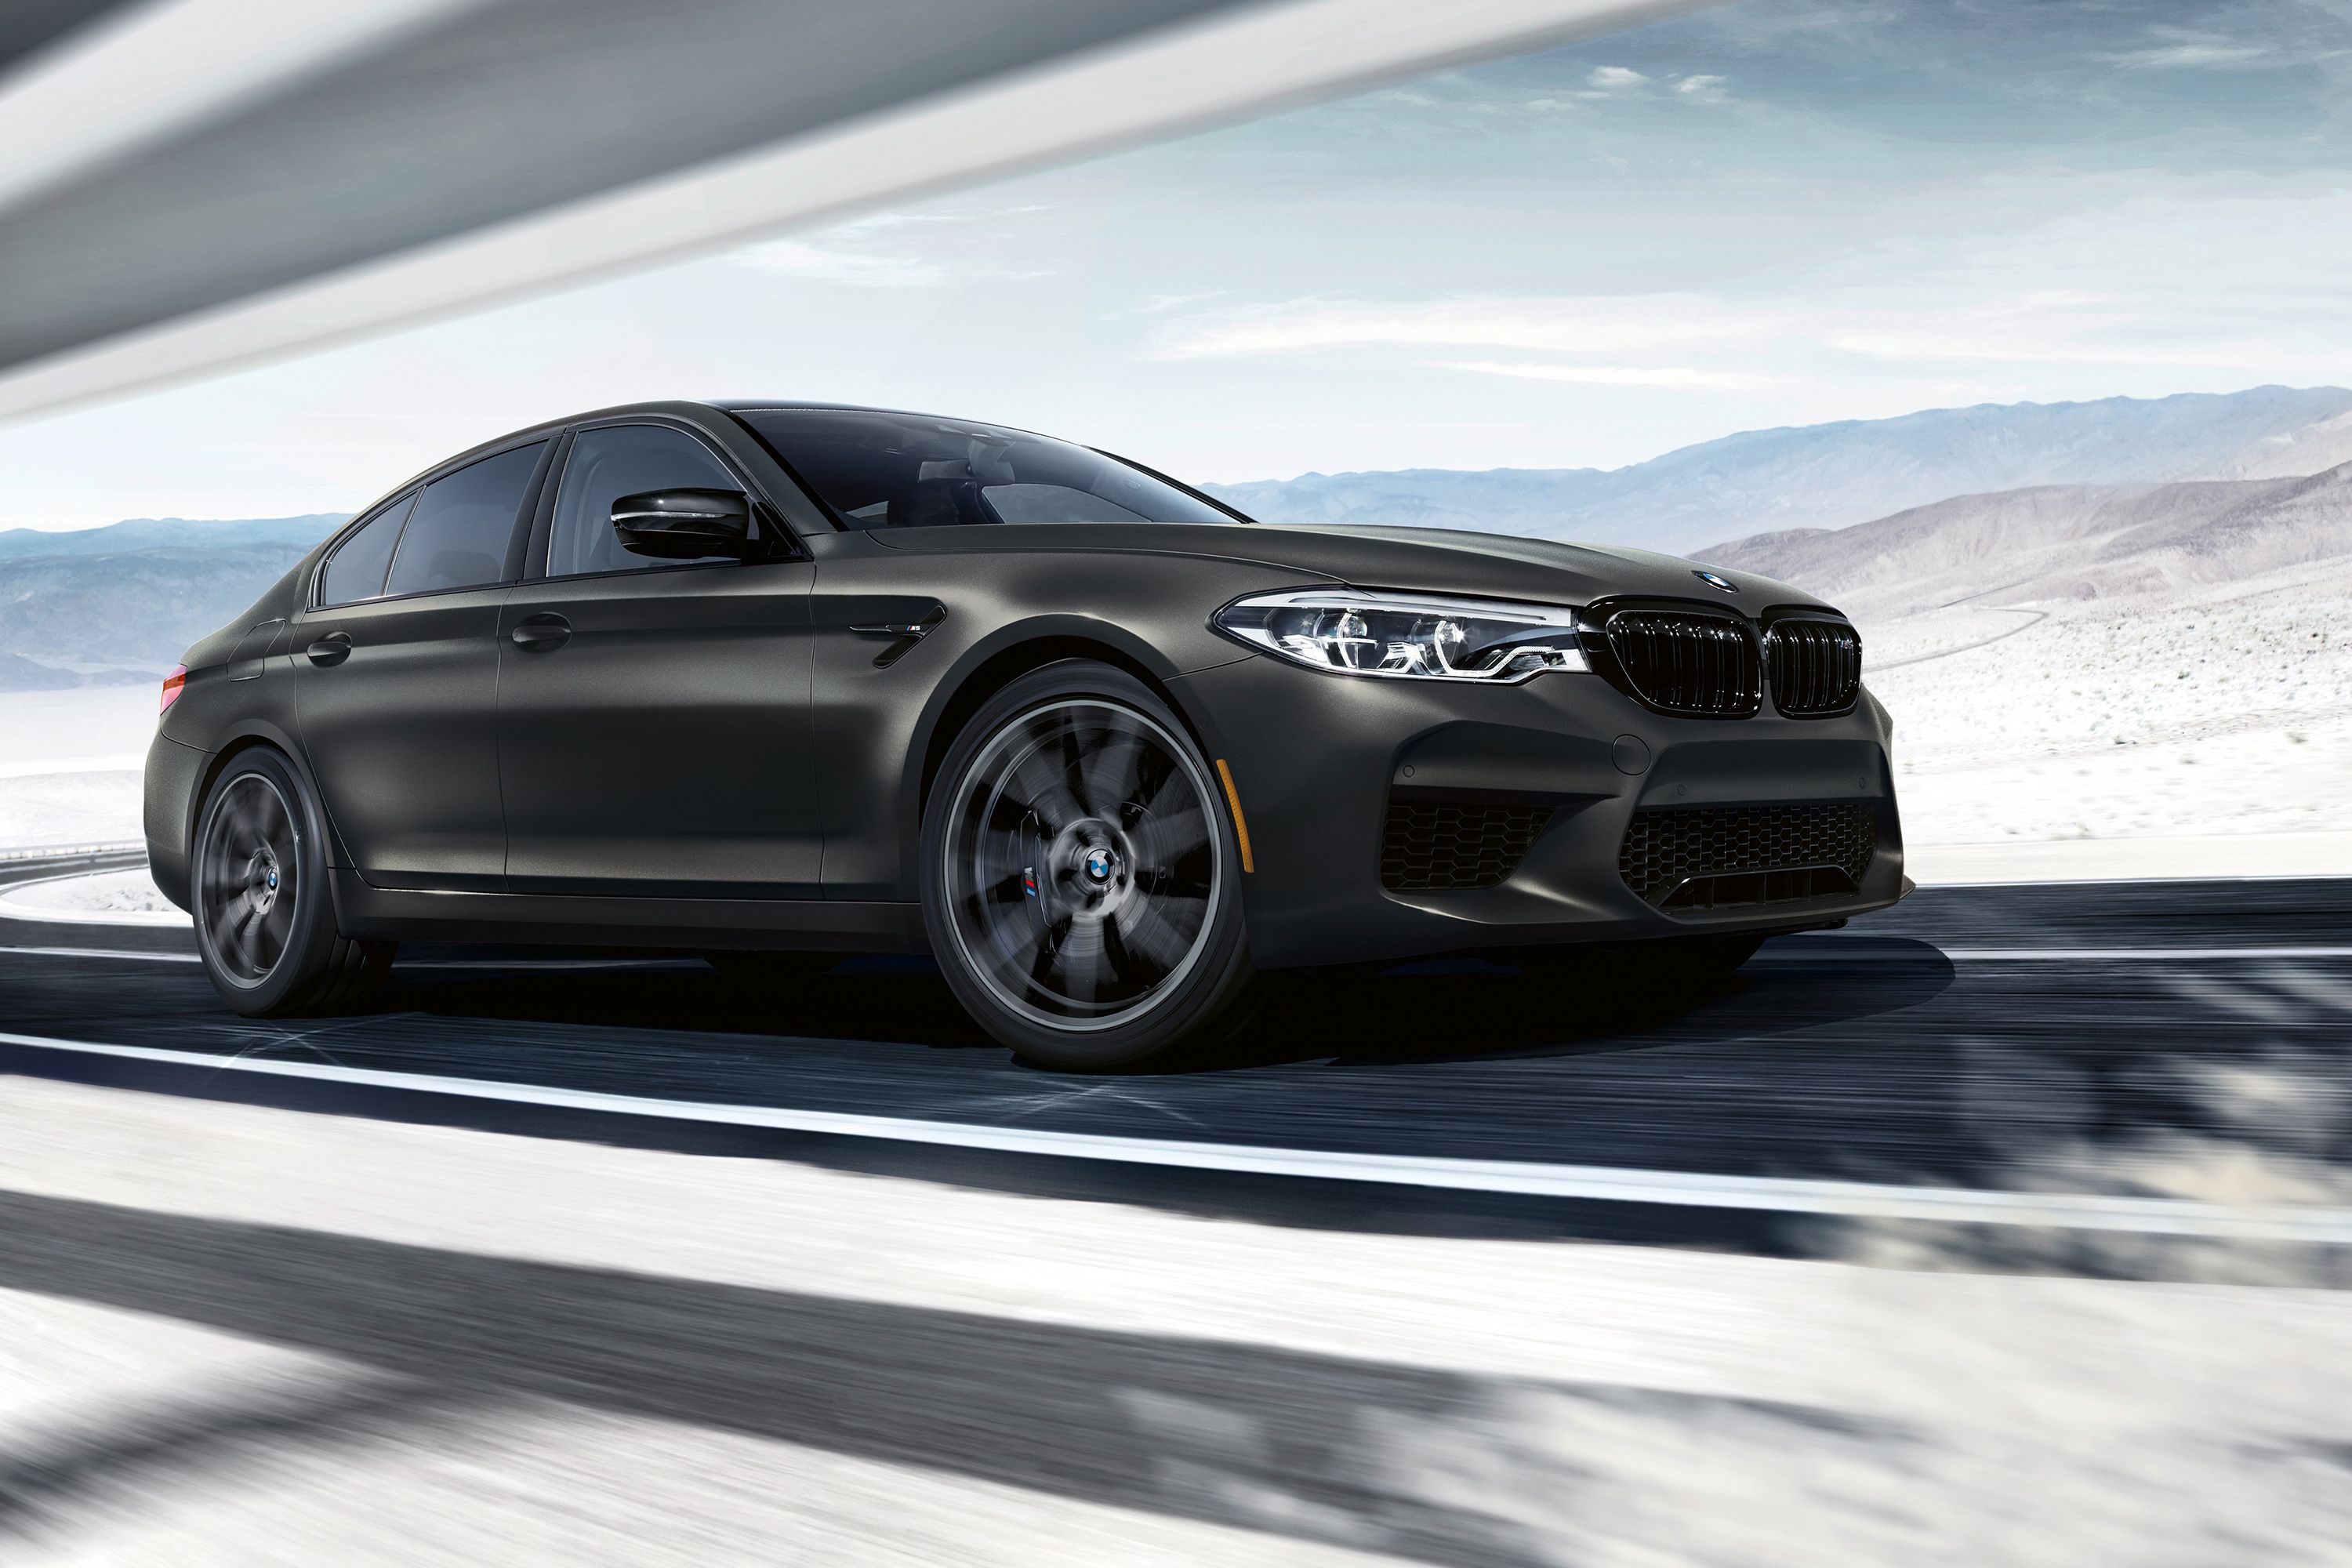 The 2020 BMW M5 Edition 35 Years Is a Subtle Tribute